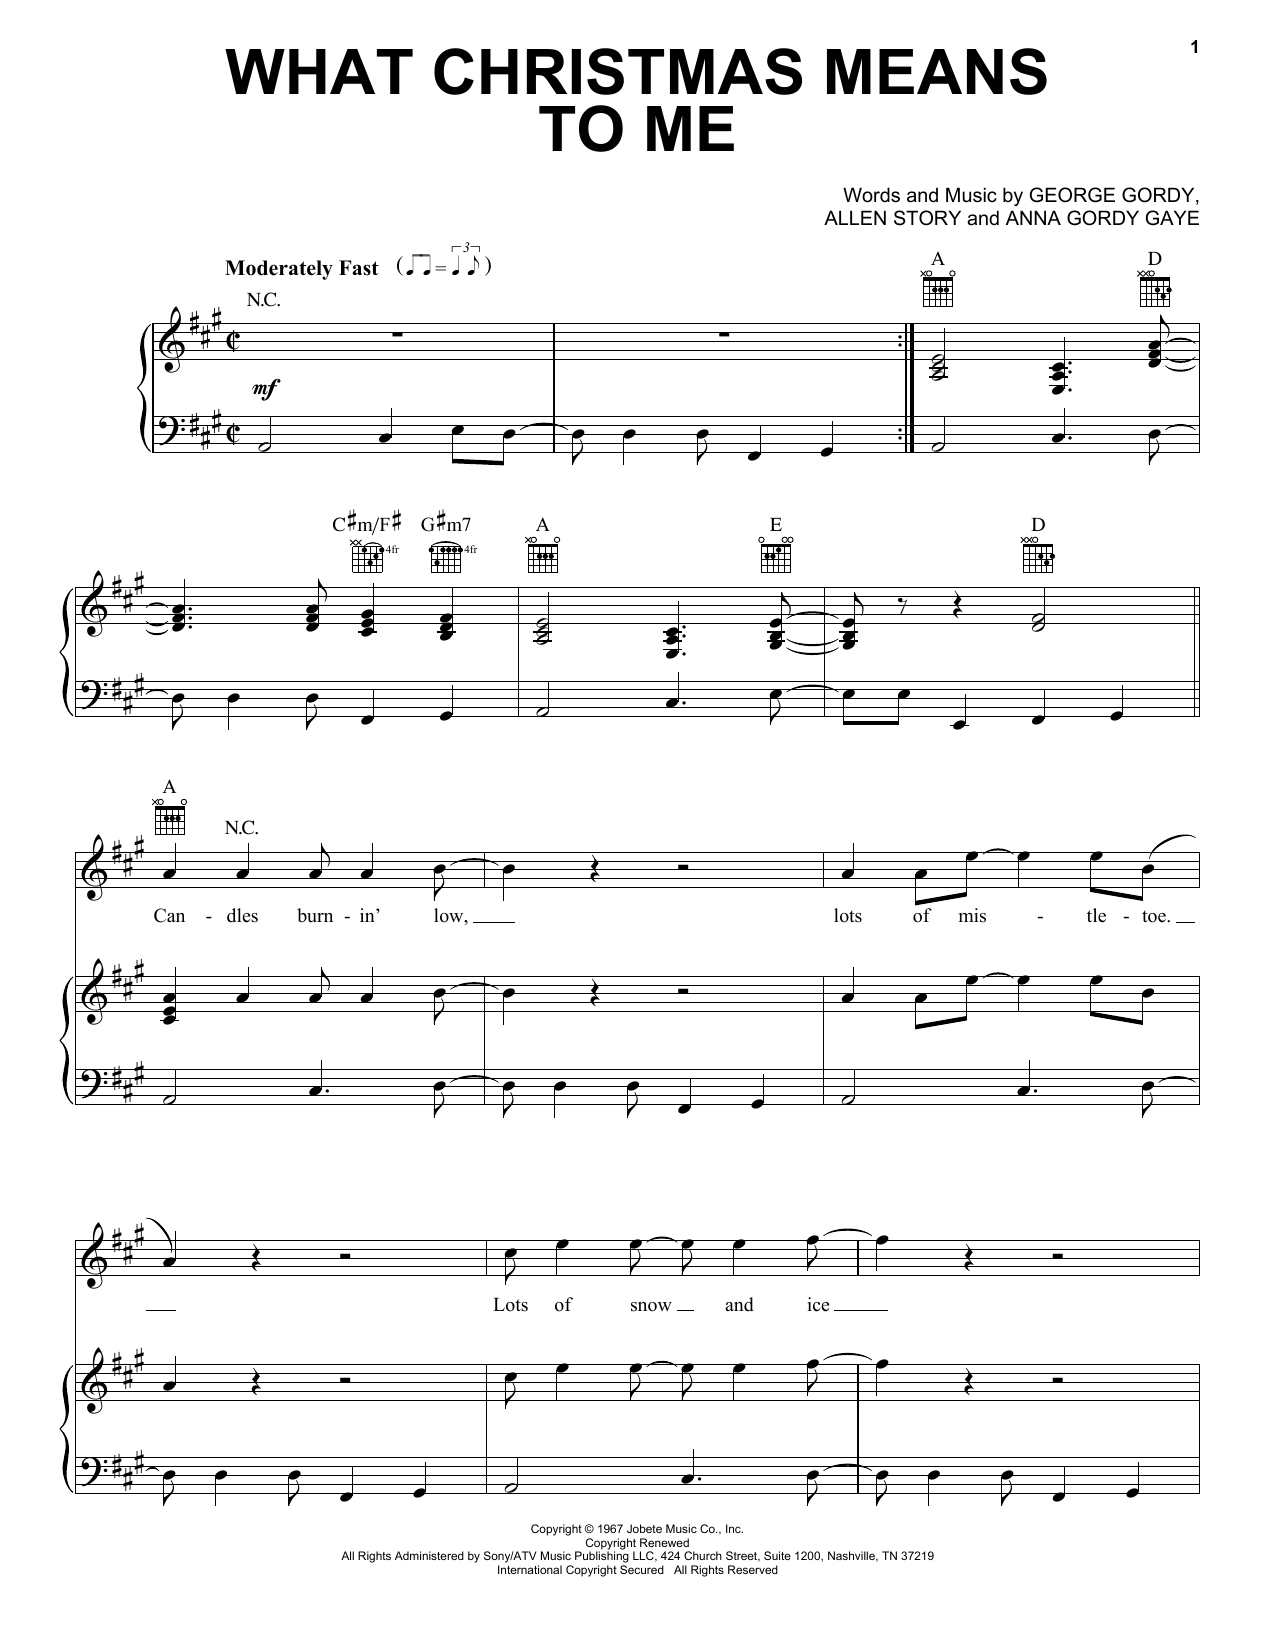 Pentatonix What Christmas Means To Me sheet music notes and chords. Download Printable PDF.